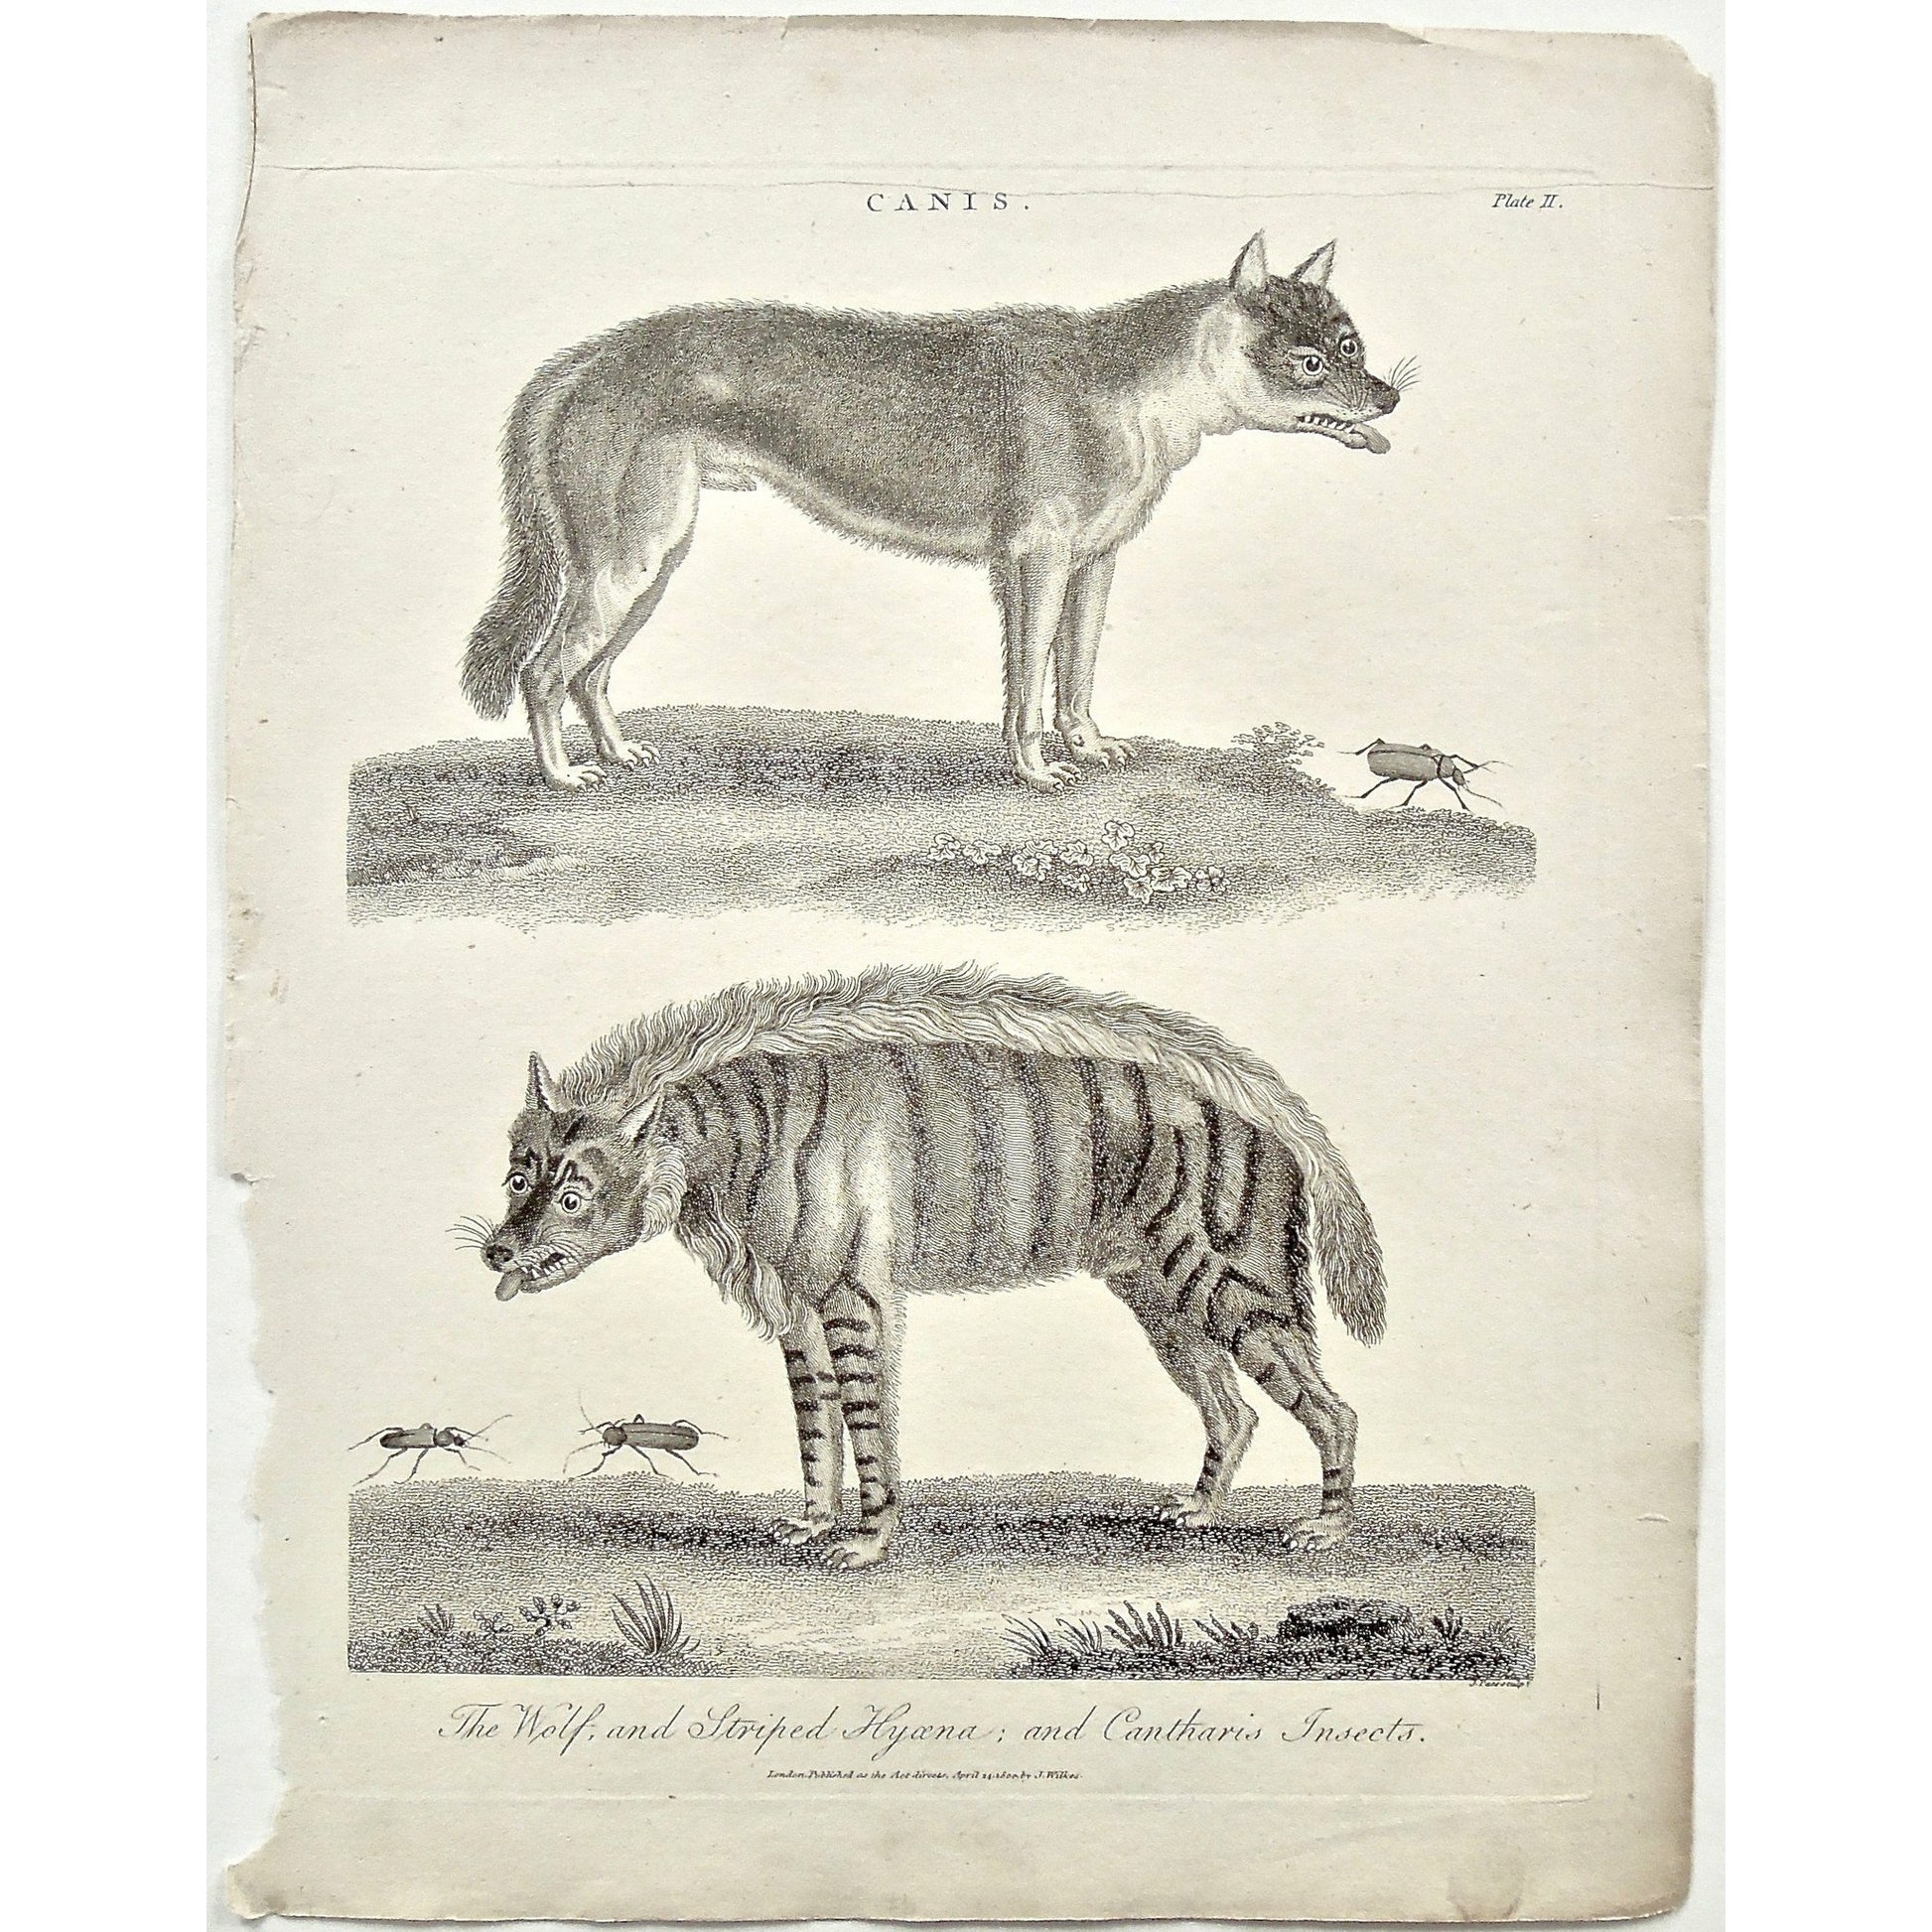 Canis, Canine, Dog, Dogs, animal, Animals, Wolf, wolves, Striped Hyaena, Striped, Hyaena, Cantharis, insects, Cantharis insects, bugs, Universal Dictionary, Dictionary, Encyclopaedia Londinensis, Encyclopedia, London, Antique Print, Antique, Prints, Vintage, Vintage Art, Art, Wall art, Decor, wall decor, design, engraving, original, authentic, Collectors, Collectable, rare books, rare, book, printmaking, print, printers, Wilkes, Adlard, Pass, 1800,